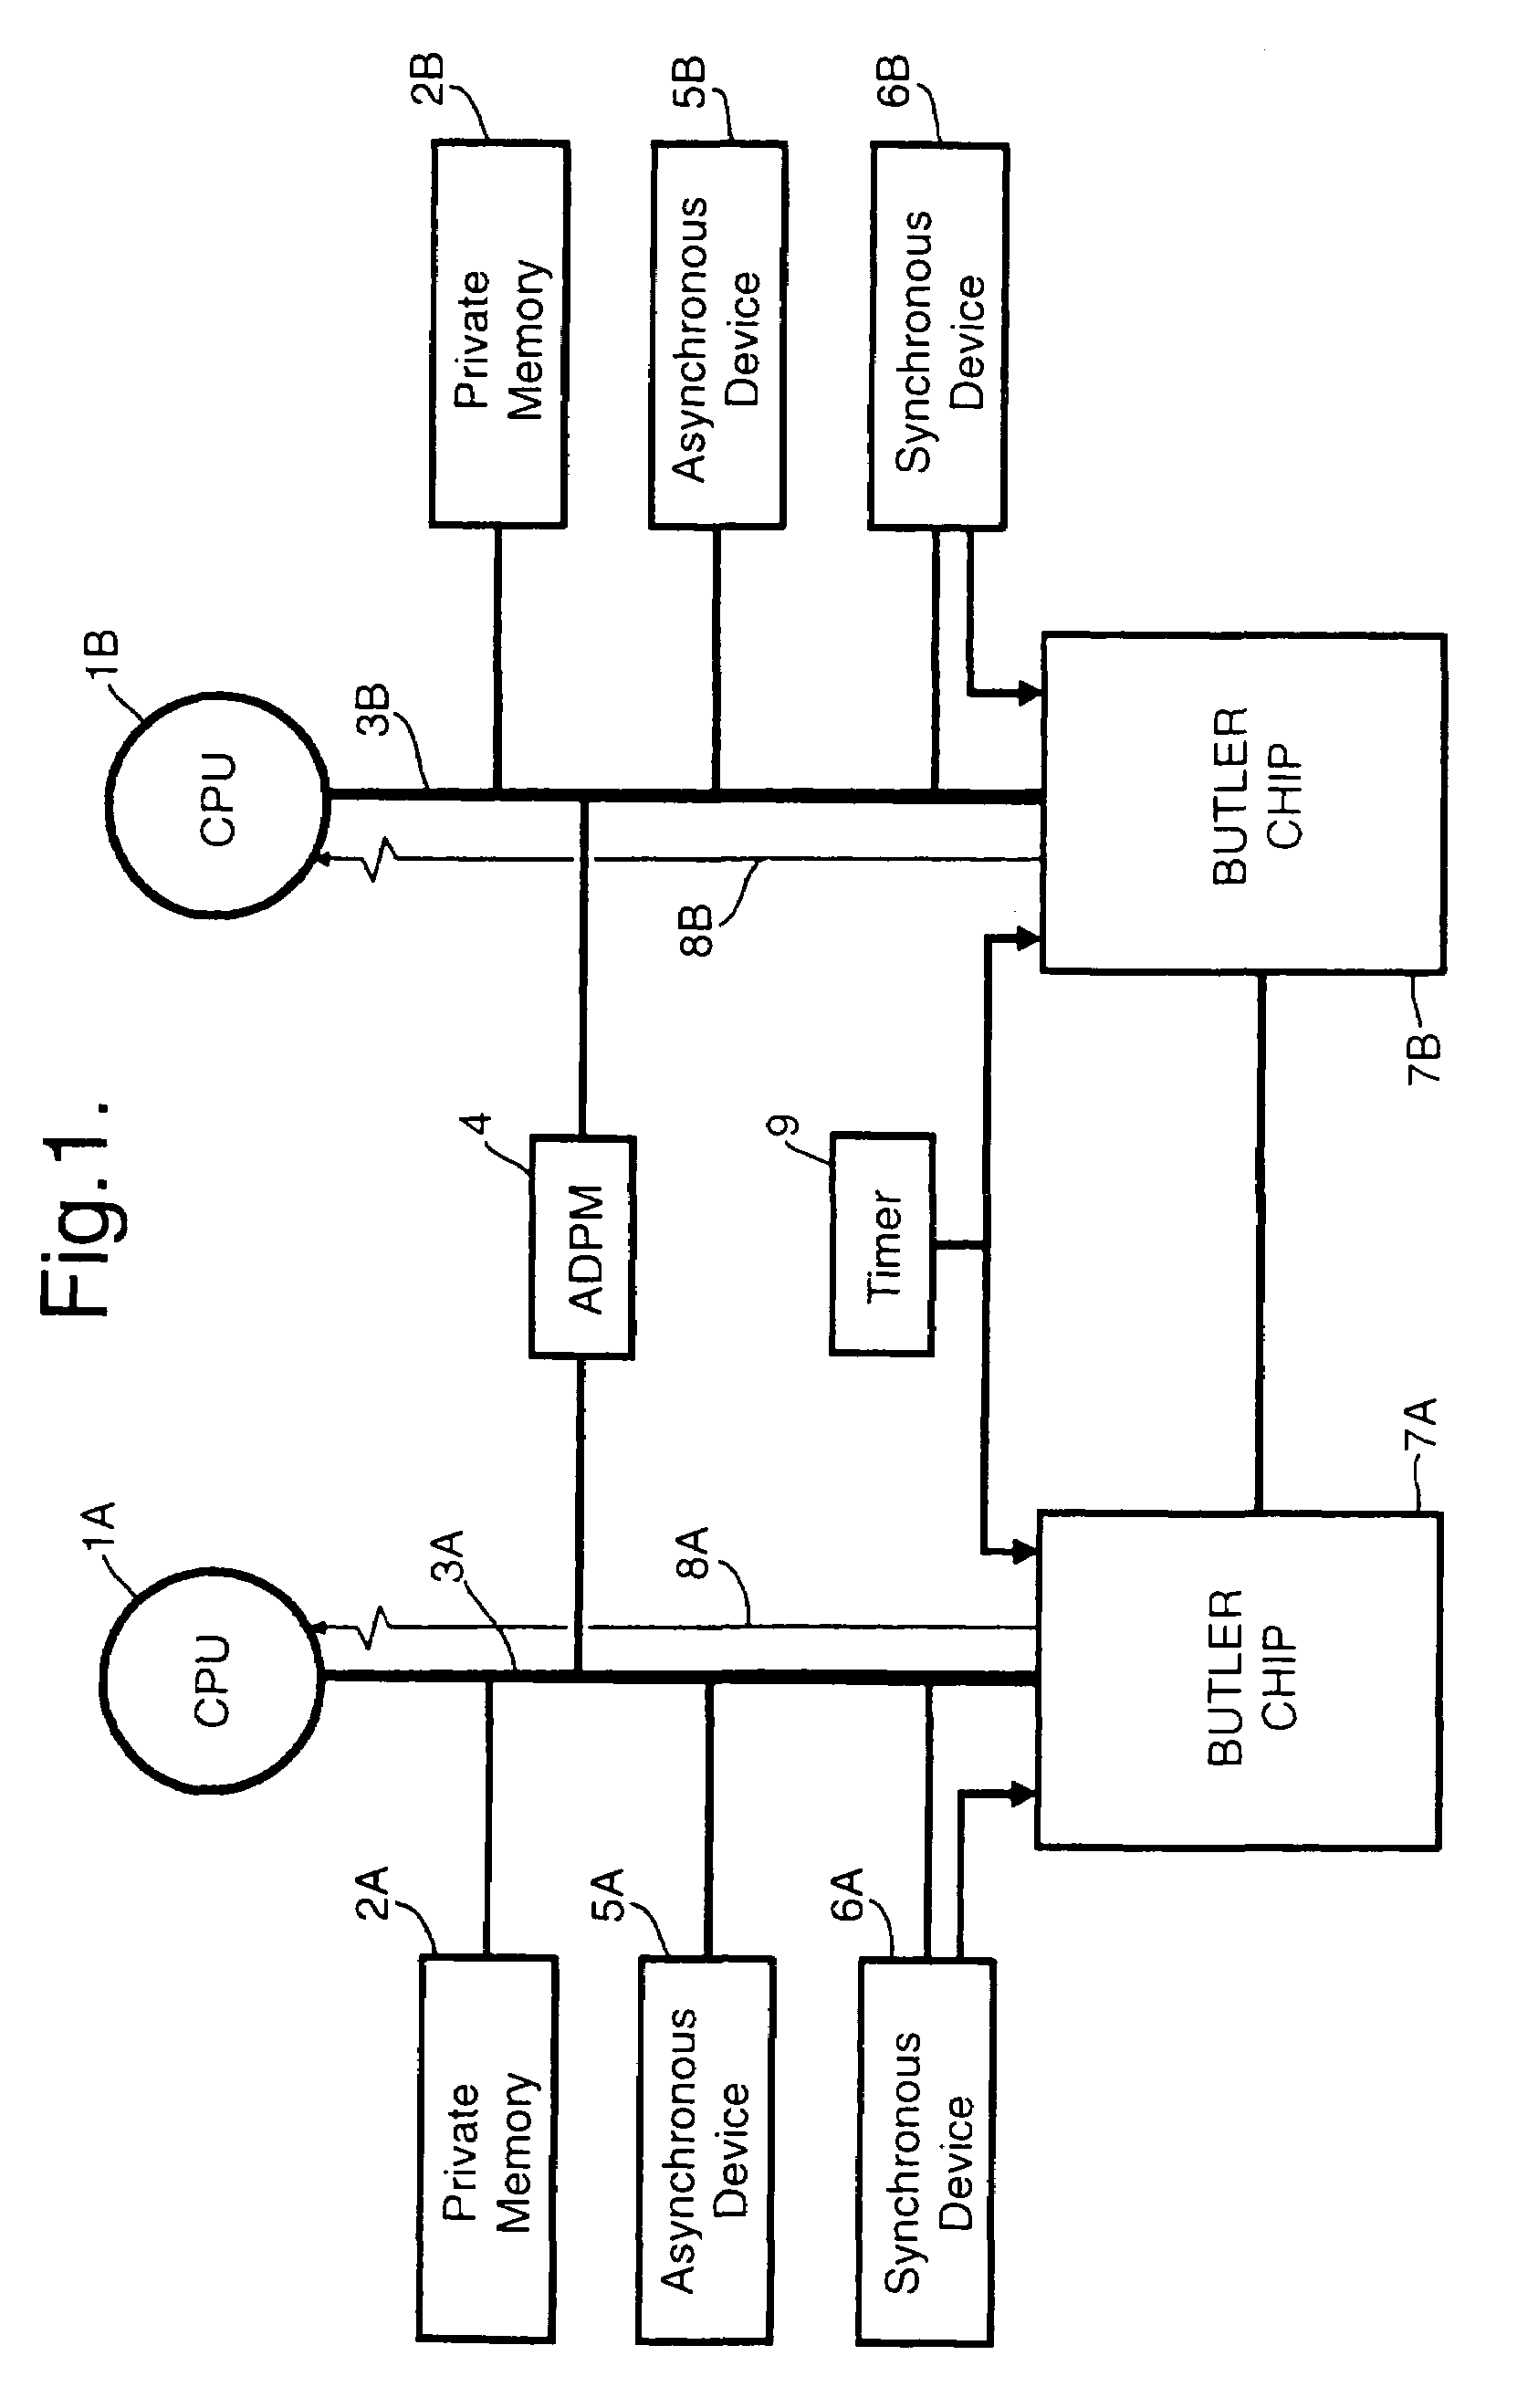 Integrated circuits for multi-tasking support in single or multiple processor networks